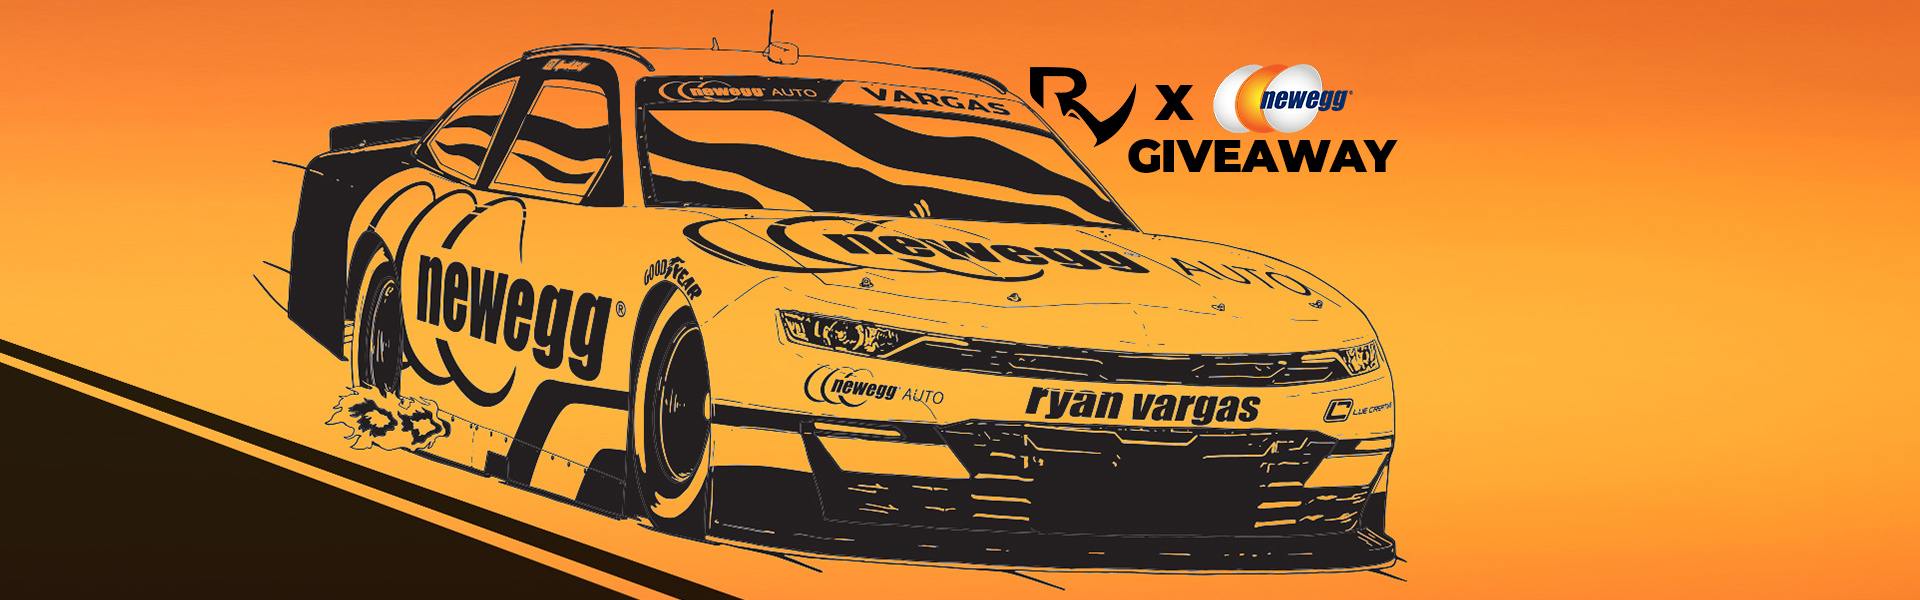 Newegg Partners with Ryan Vargas to Support One of NASCAR’s Youngest Rising Stars, and to Drive Awareness for the Company’s Newly Launched Automotive Storefront